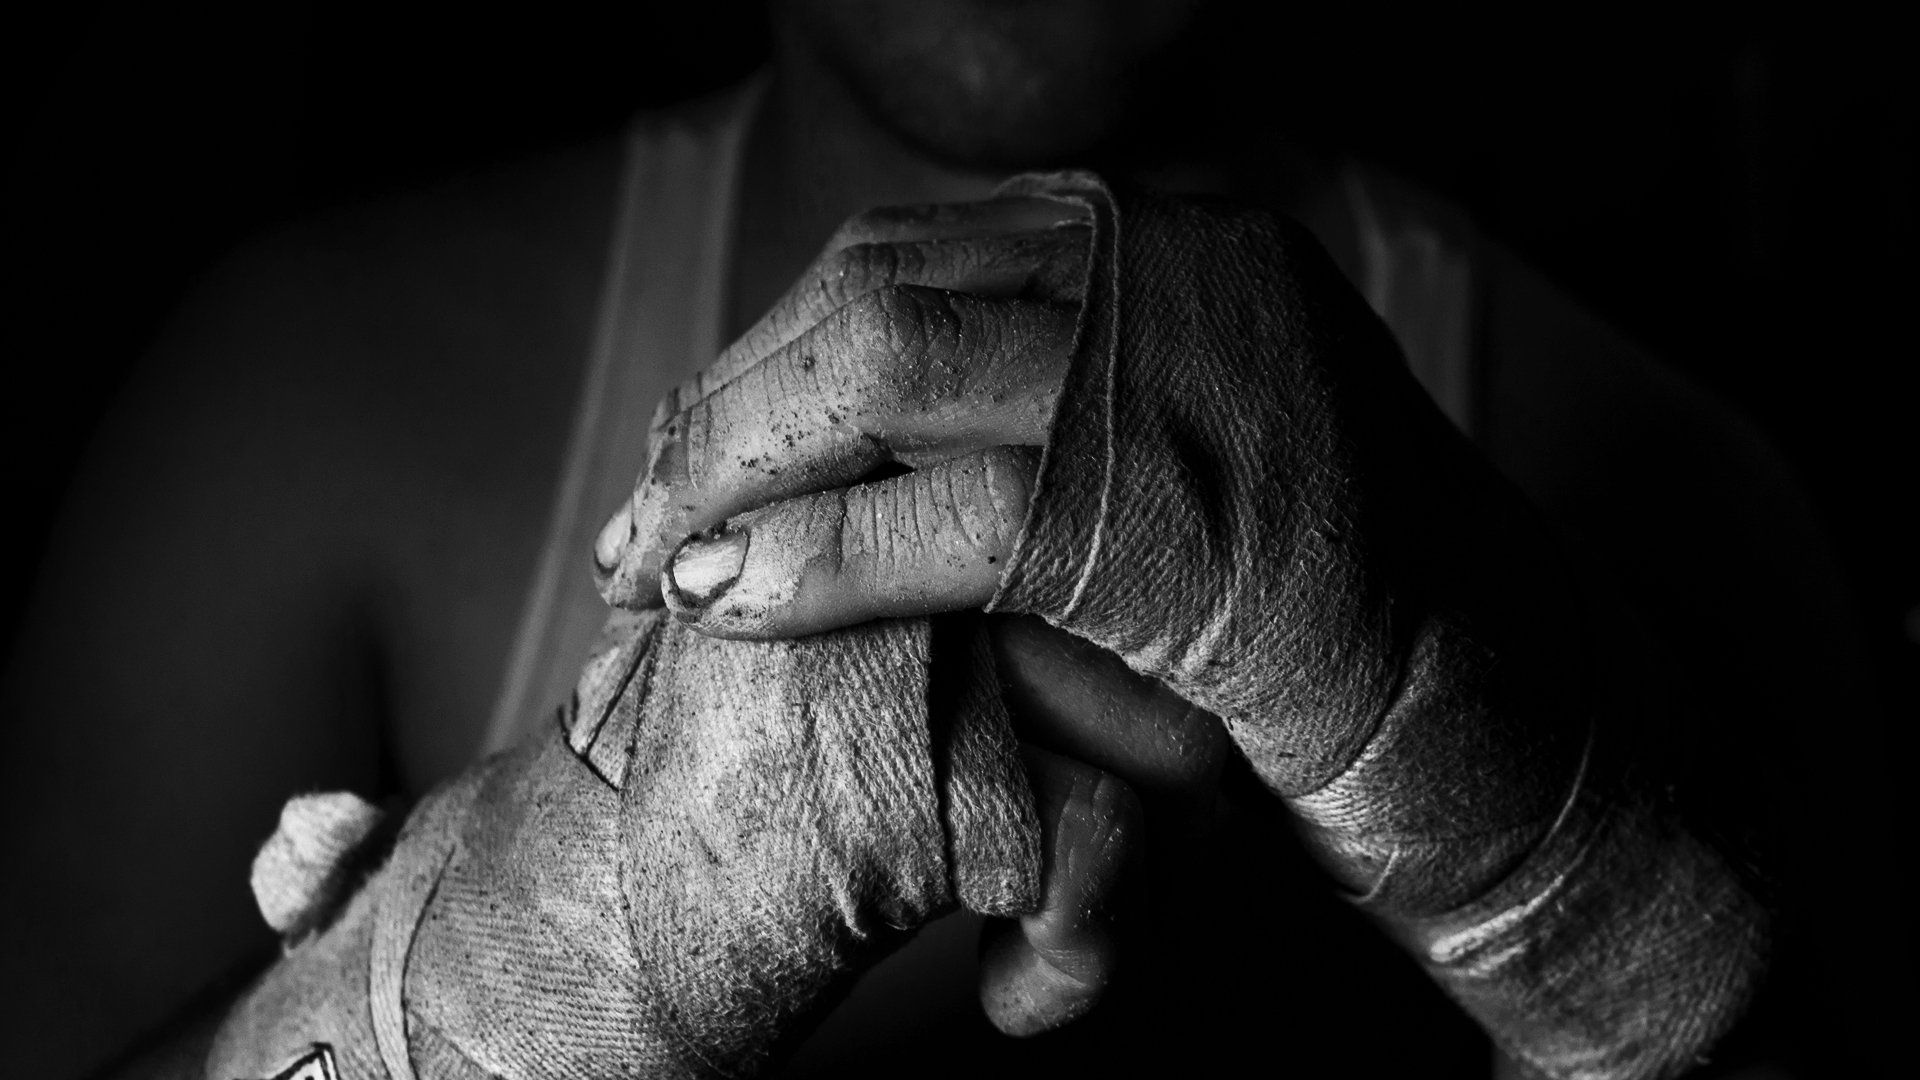 Fighting Mma Extreme People Hands Blood Black And White B W Wallpaper